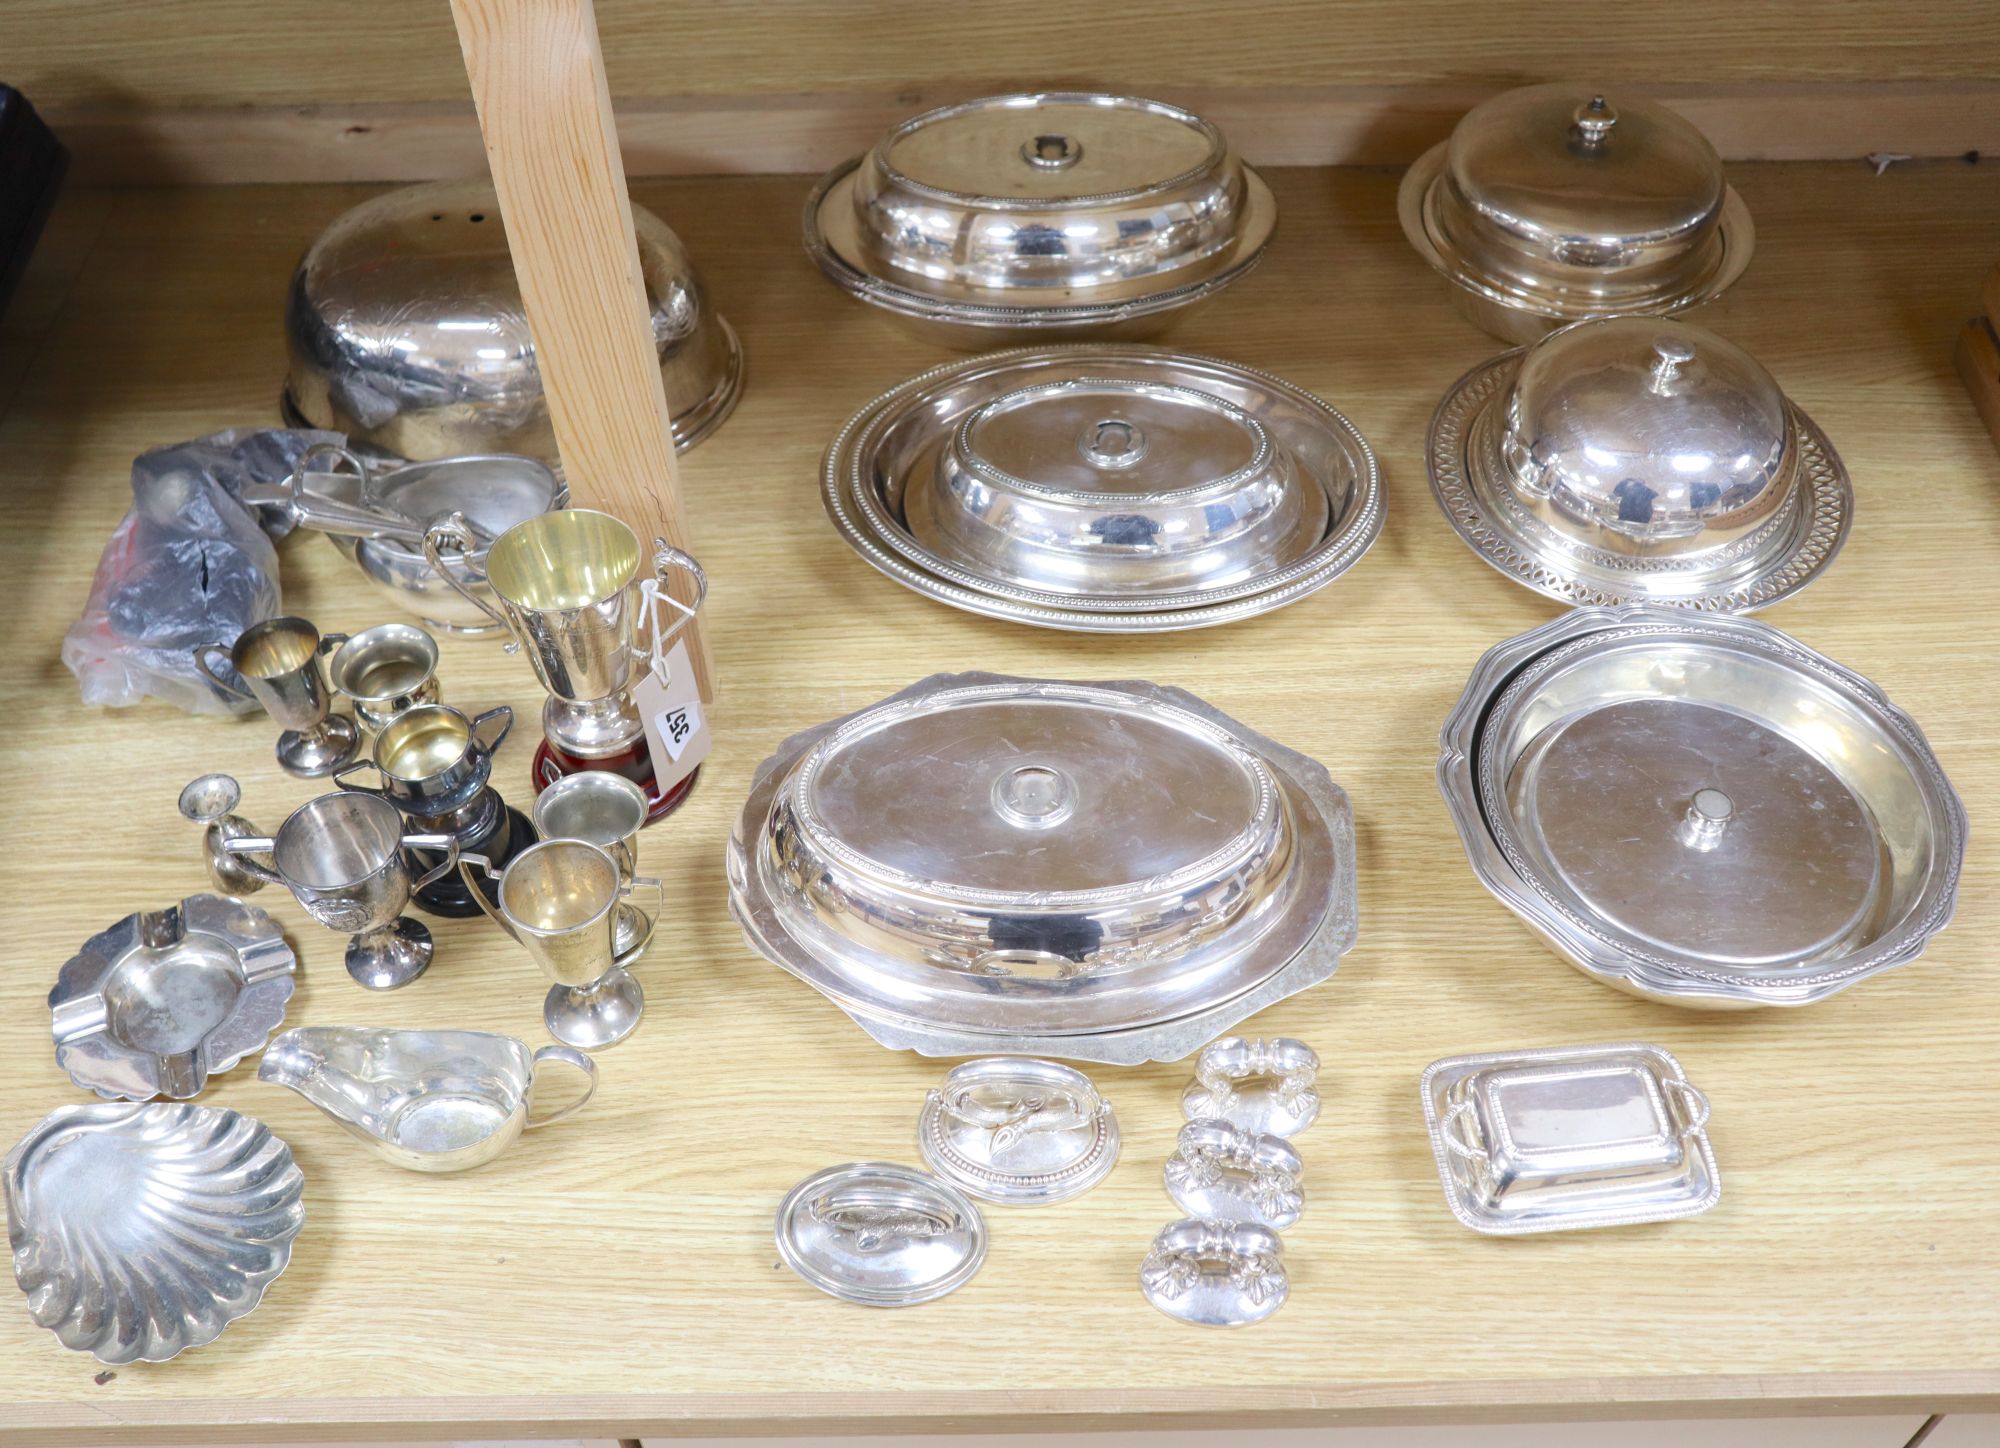 A quantity of plated items, including entree dishes and covers, two muffin dishes and covers and